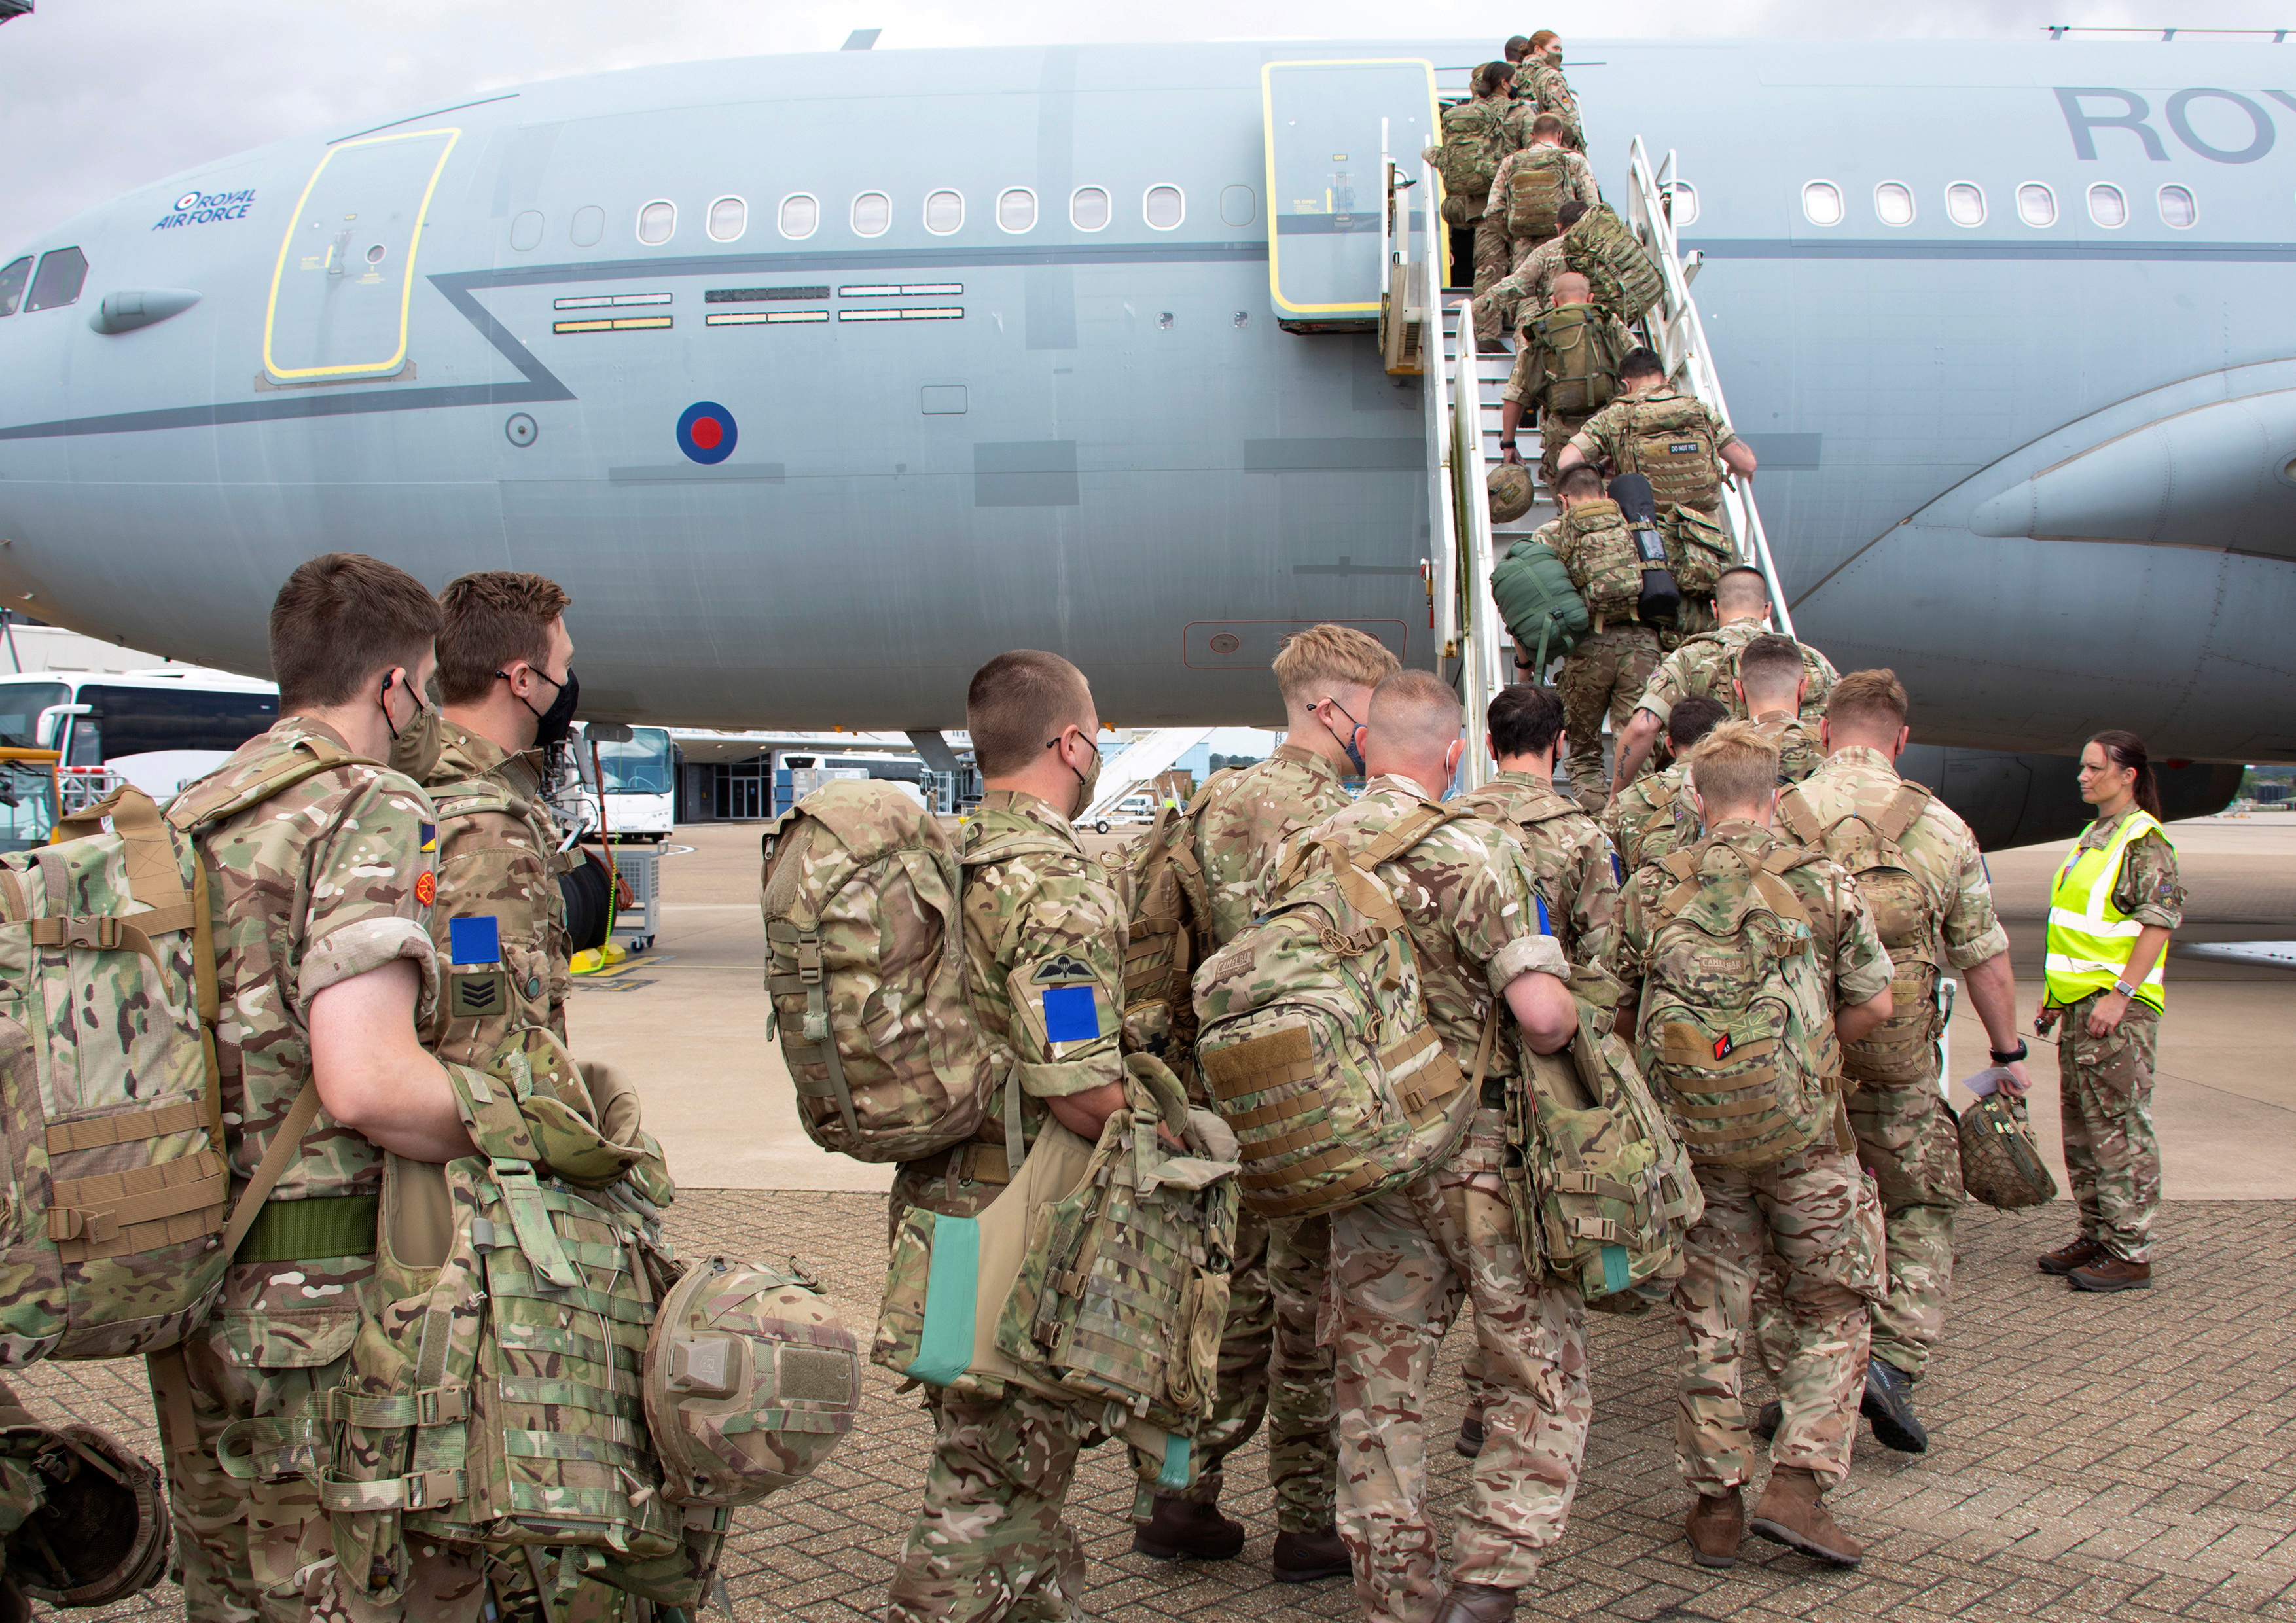 Military personnel board an RAF Voyager aircraft at RAF Brize Norton, as they leave for Afghanistan to provide support to British nationals leaving the country